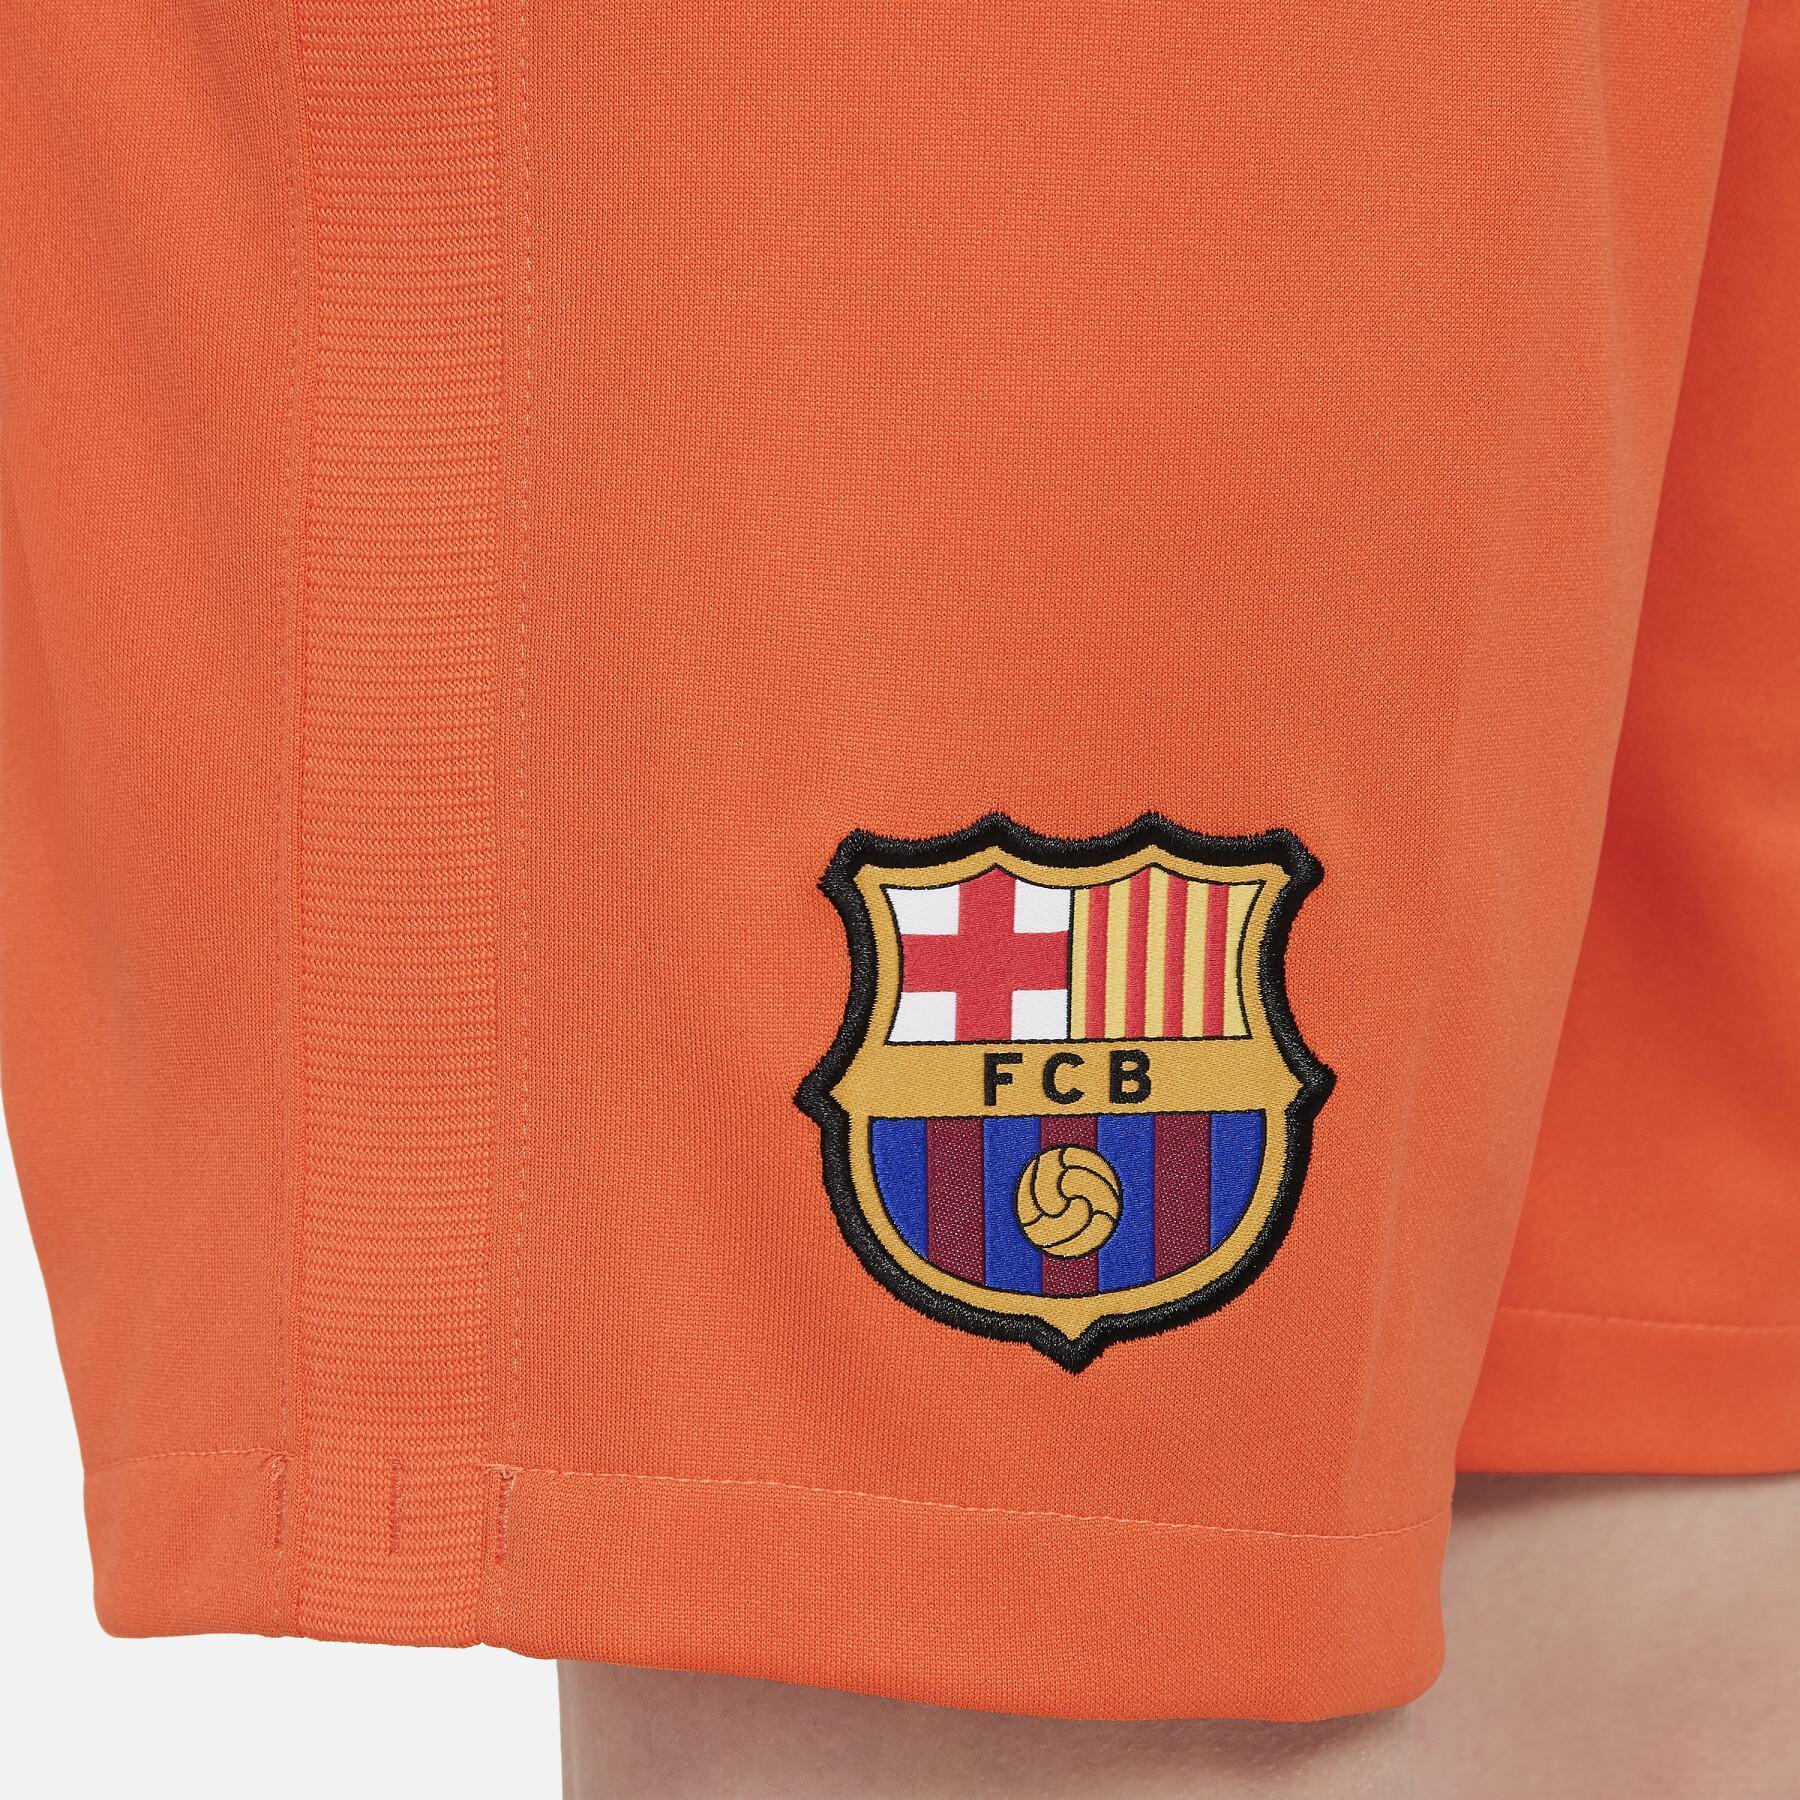 Home childcare shorts FC Barcelone 2021/22